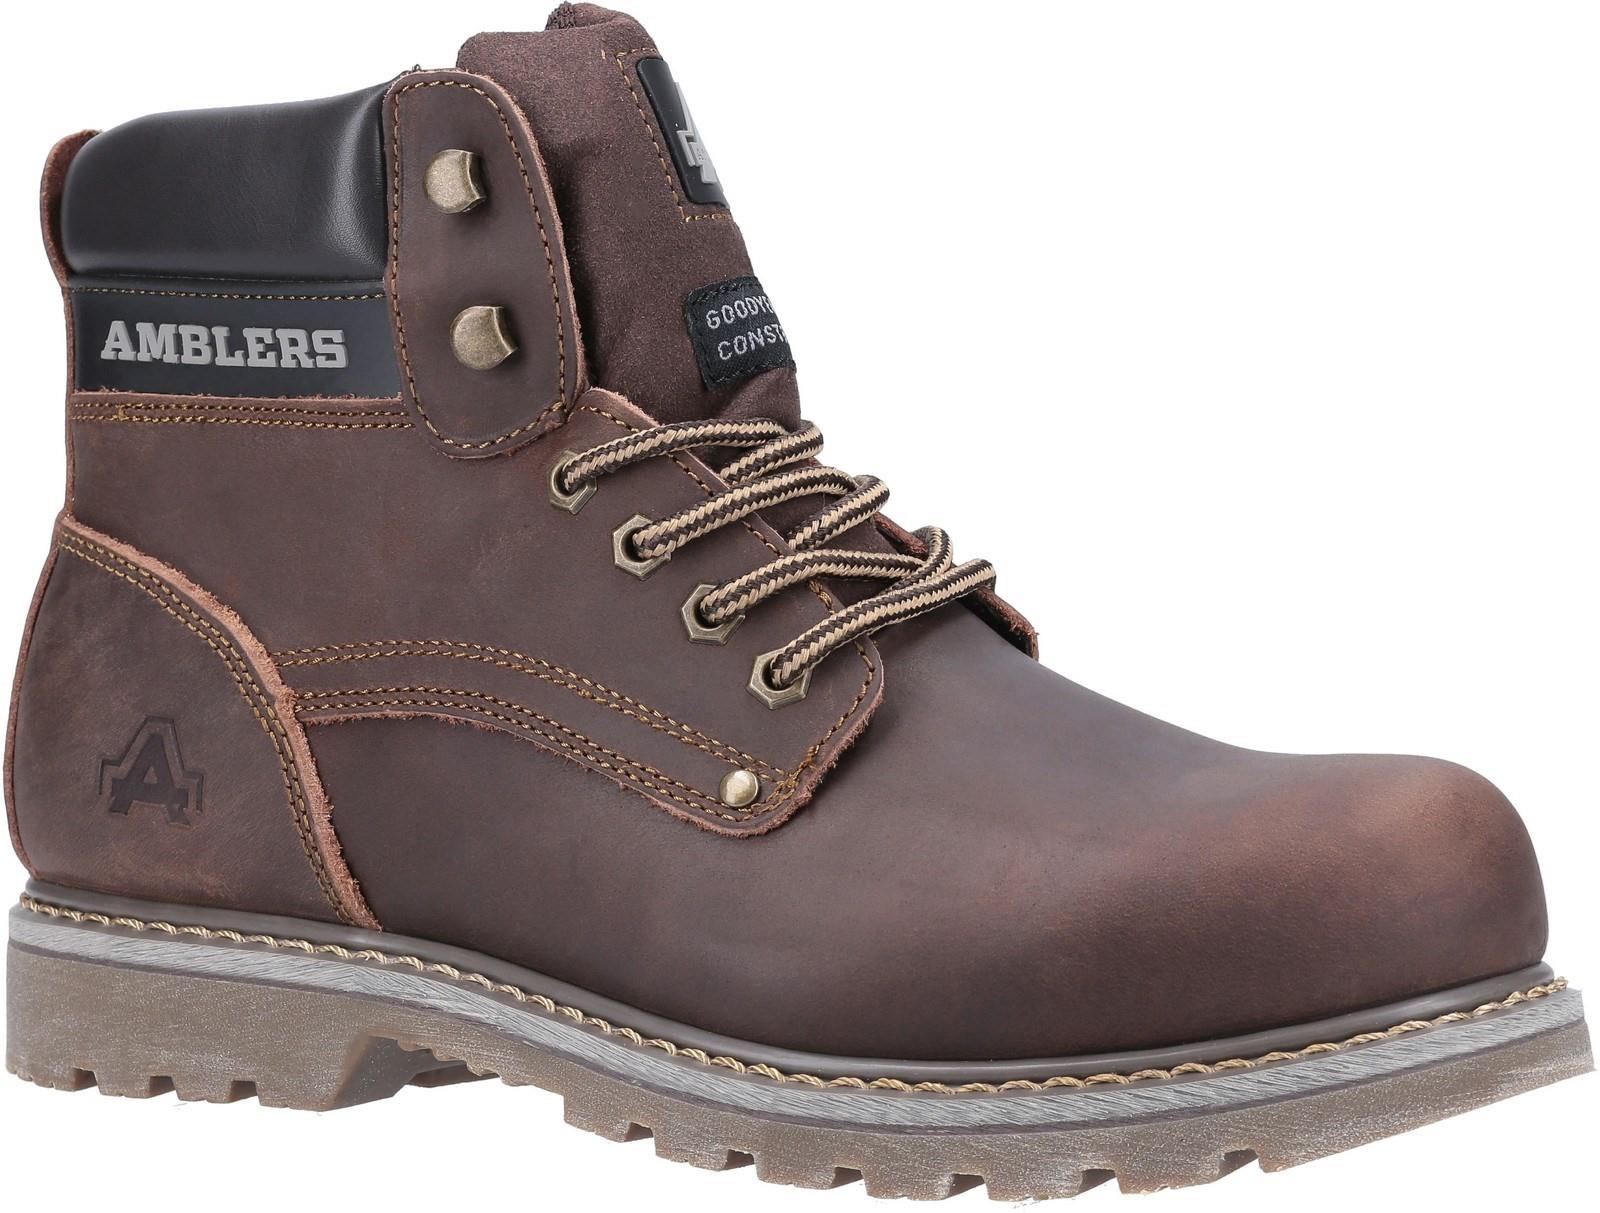 Amblers Dorking brown crazy horse leather lace-up non-safety boot